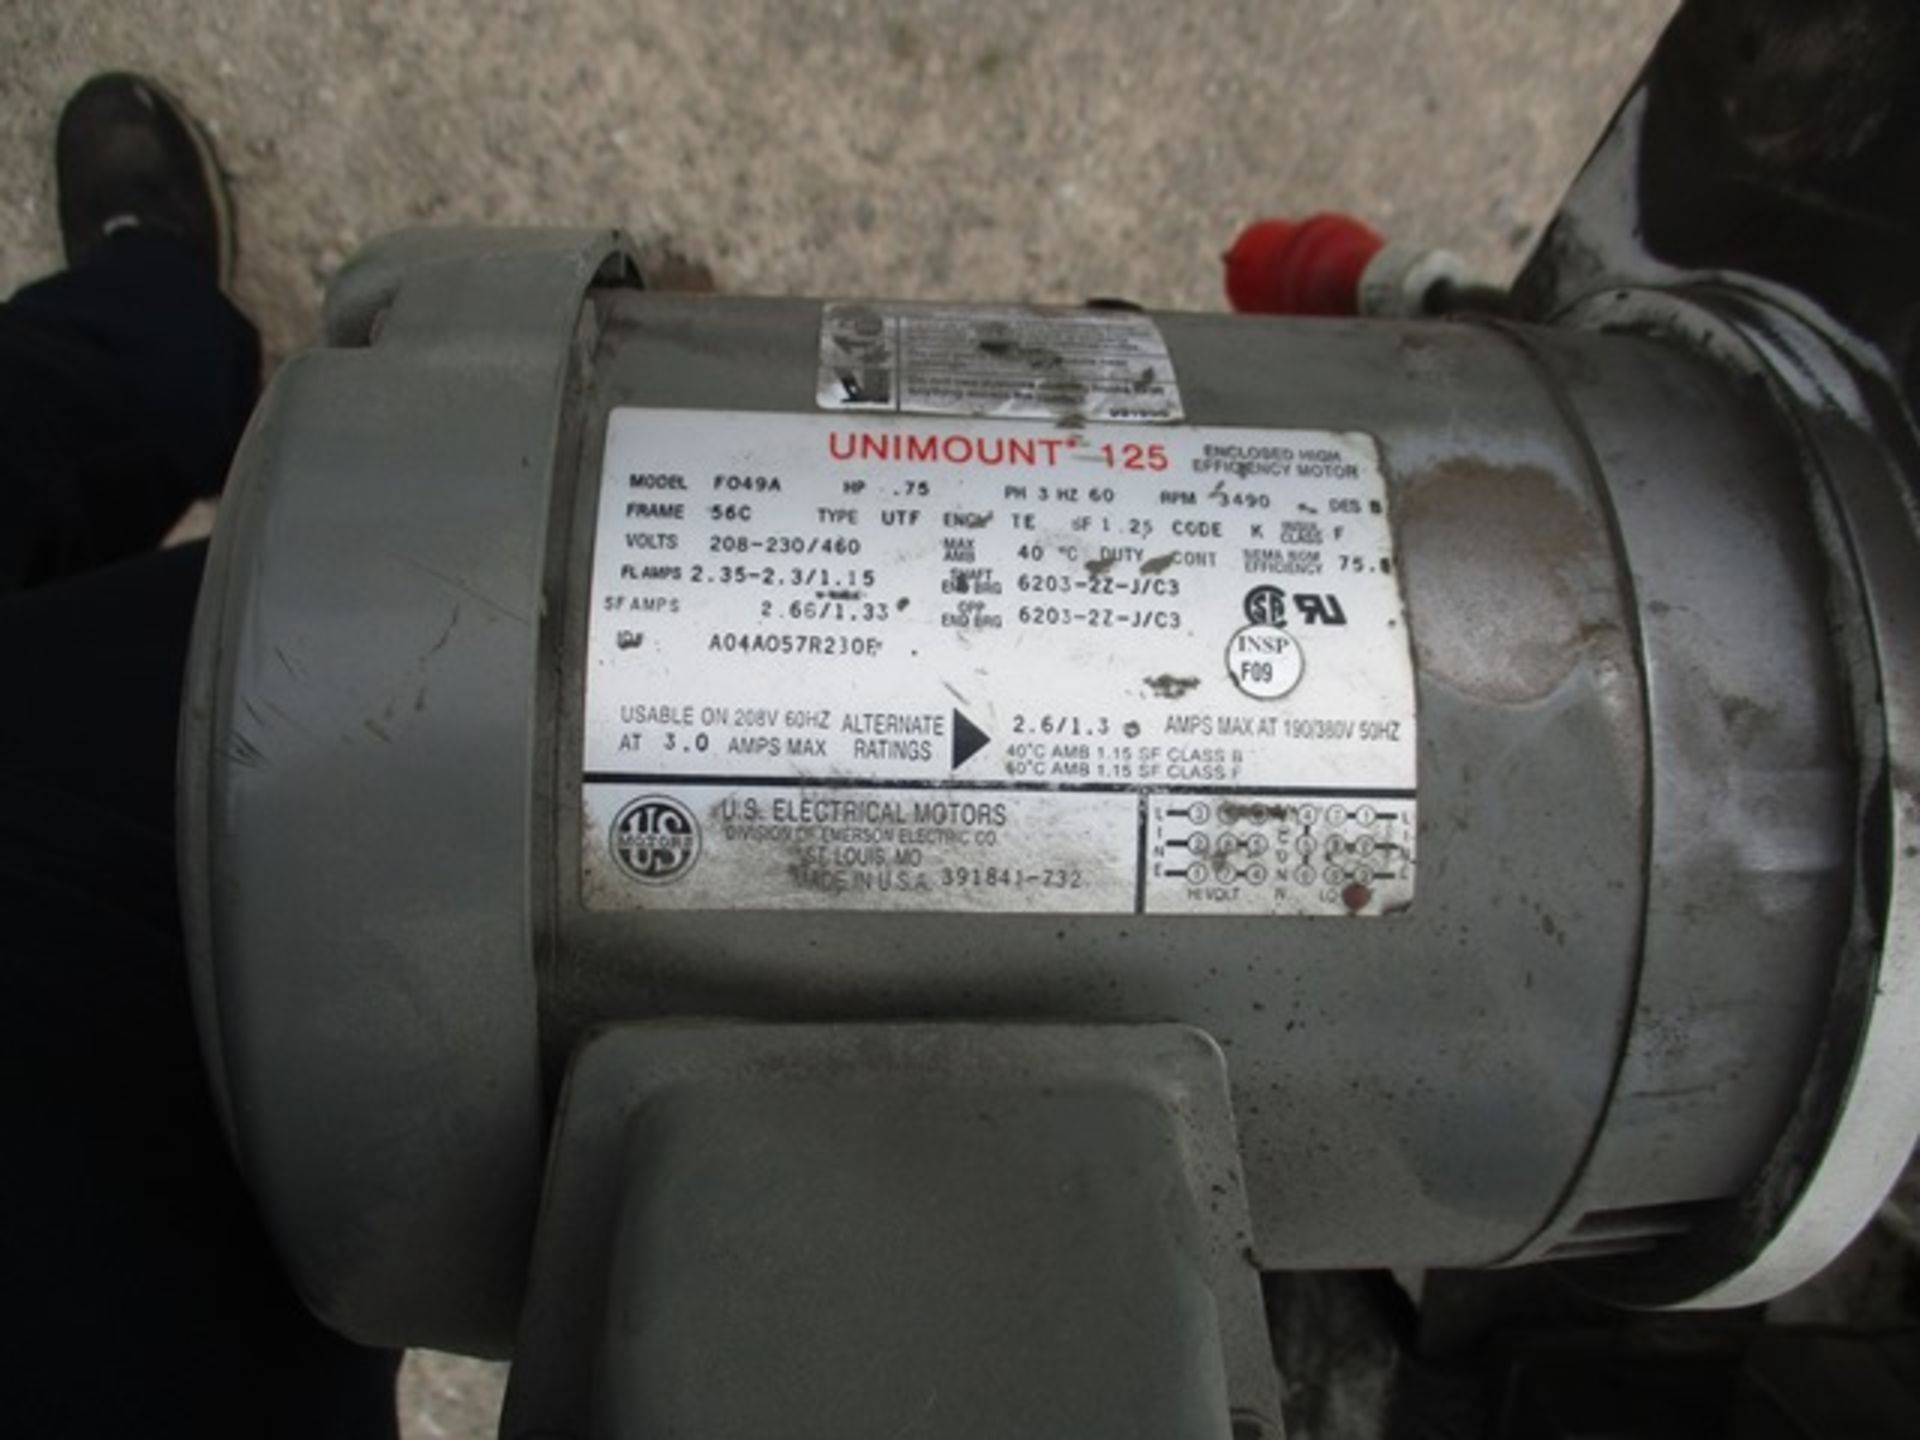 Unimount 125 F049A Bench Grinder - Image 4 of 4